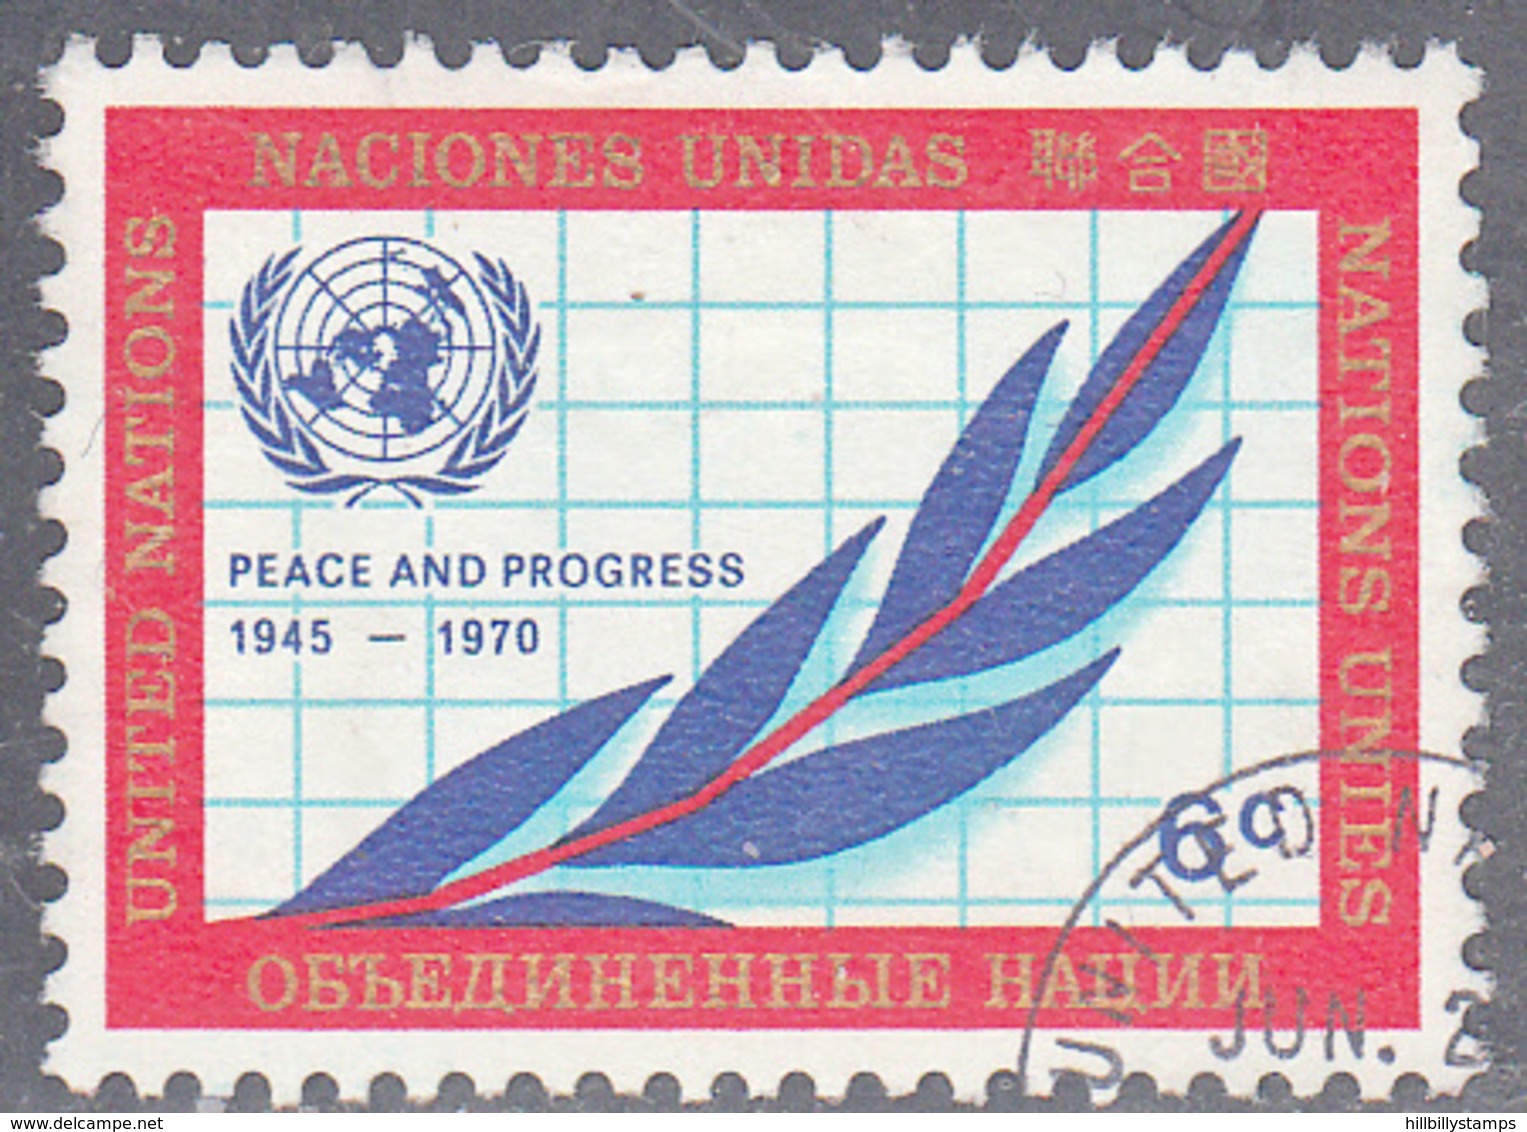 UNITED NATIONS NY   SCOTT NO .209   USED   YEAR 1970 - Oblitérés